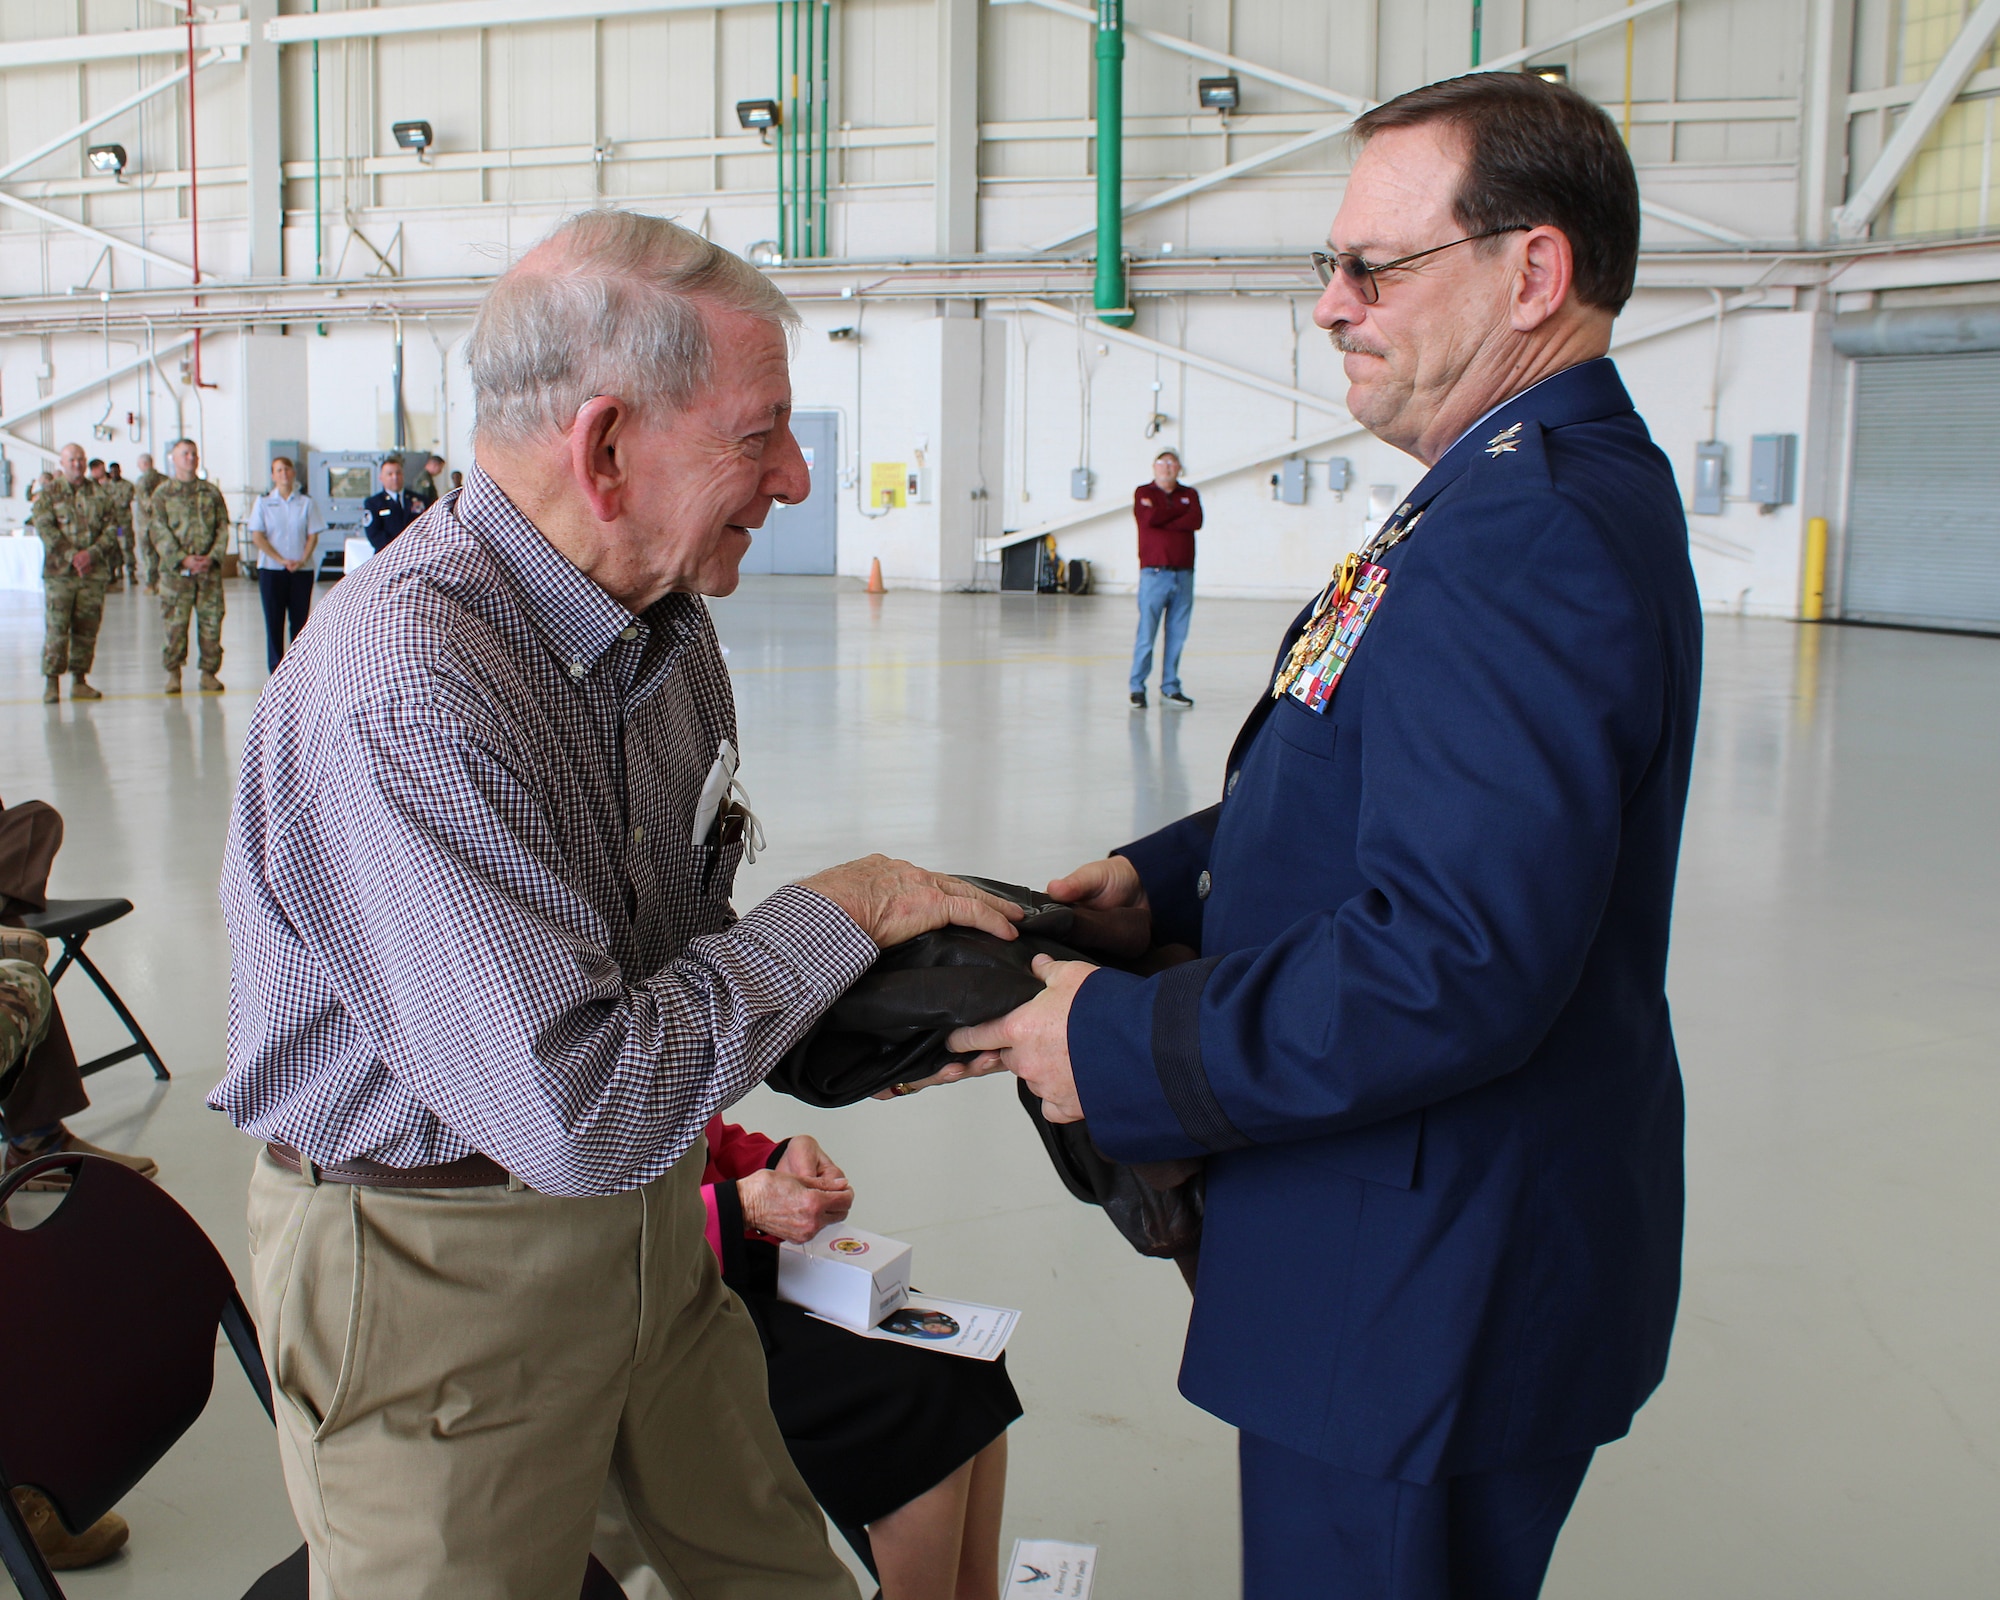 Lt. Gen. (retired) Billy M. Nabors, former Assistant Adjutant General (Air) and  Mississippi Air National Guard Commander, presents his father, Billy Nabors, with his flight jacket during his retirement ceremony, March 6, 2022, at Key Field Air  National Guard Base, Meridian, Mississippi.